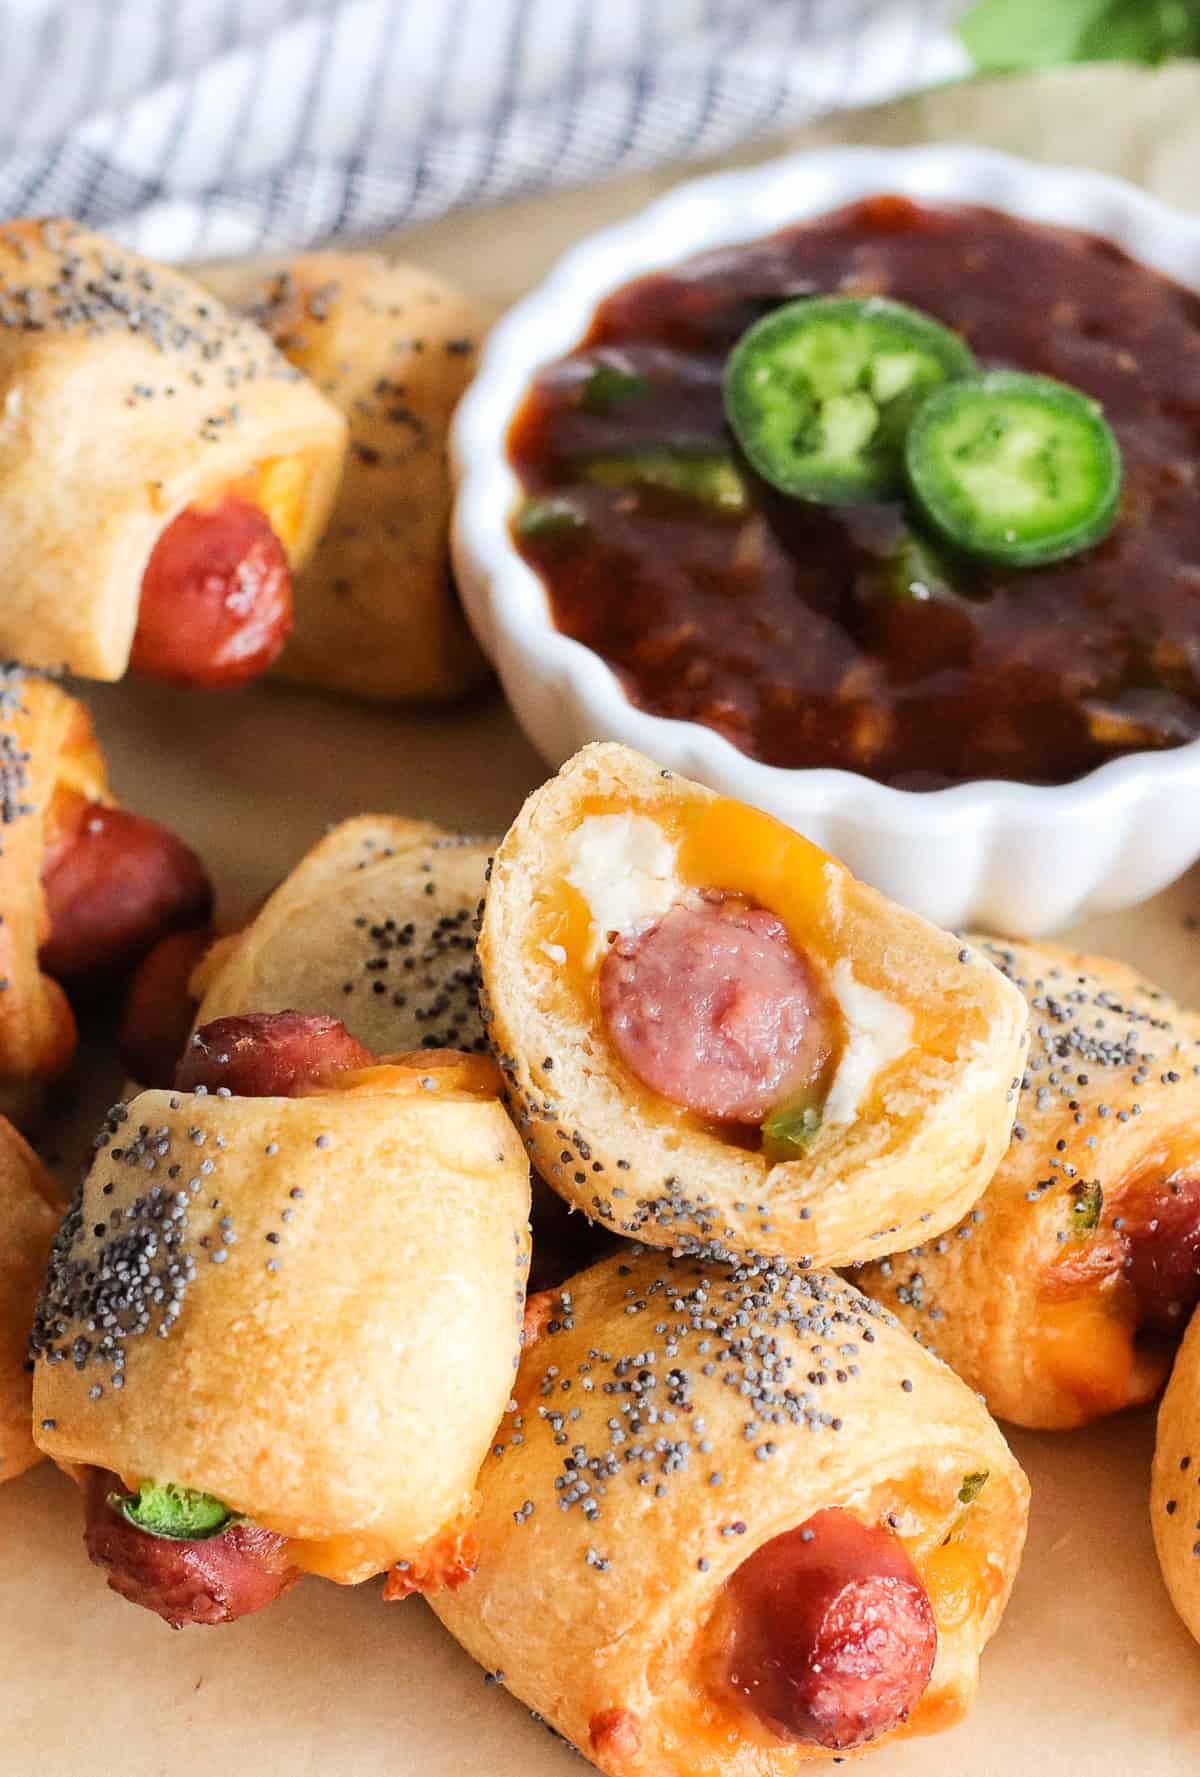 Pigs in a blanket with cheddar cheese, cream cheese, and jalapeno.